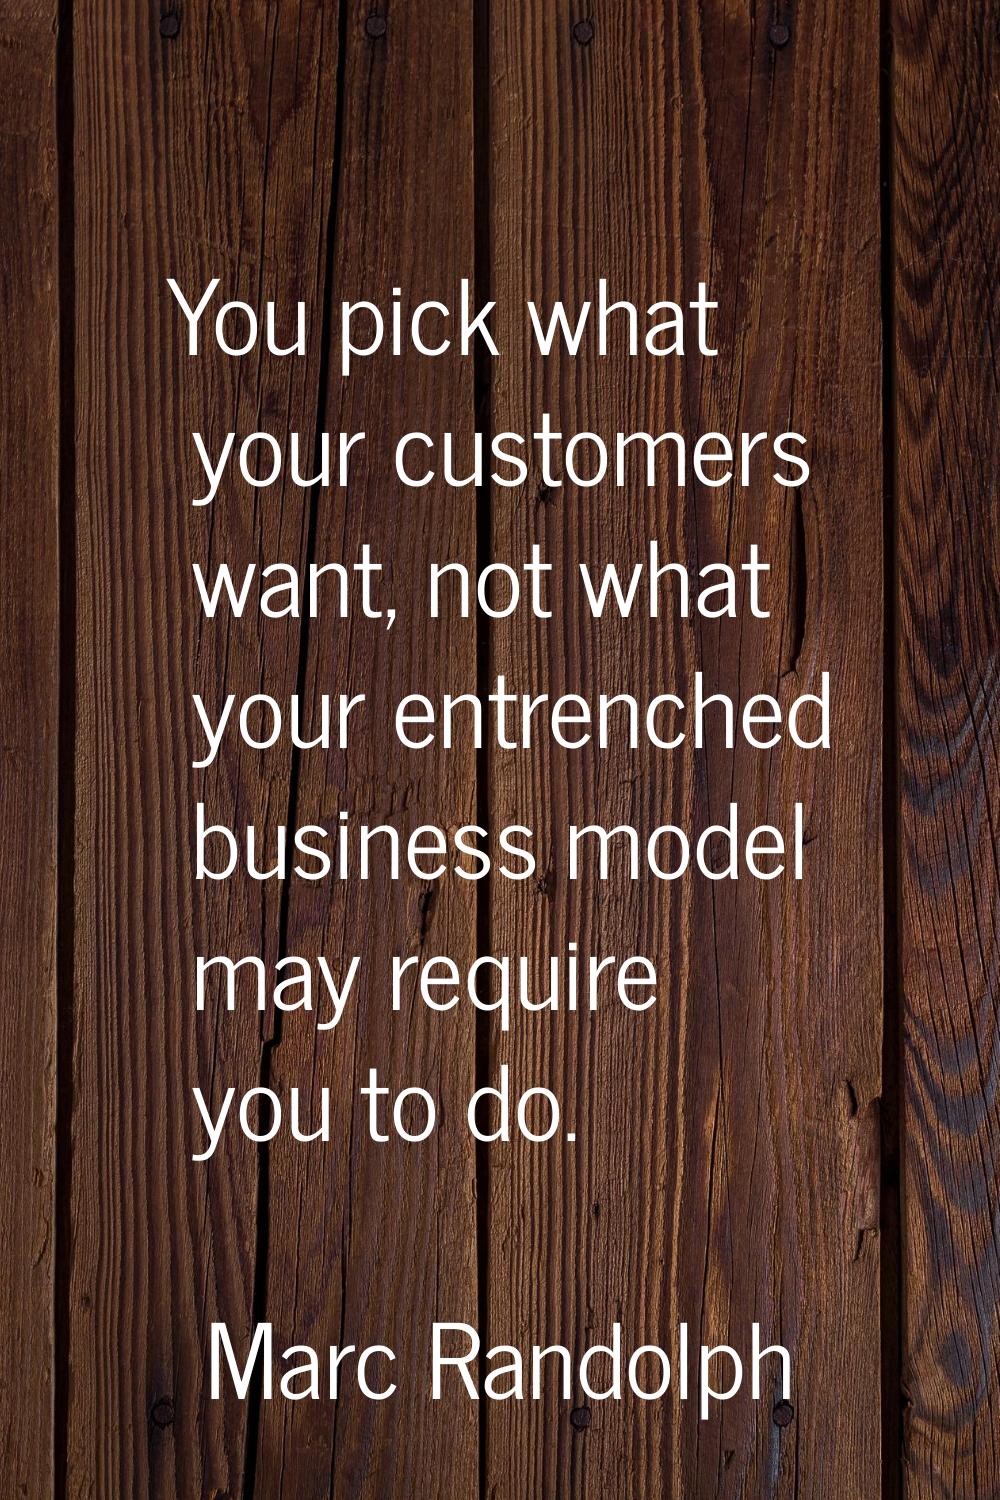 You pick what your customers want, not what your entrenched business model may require you to do.